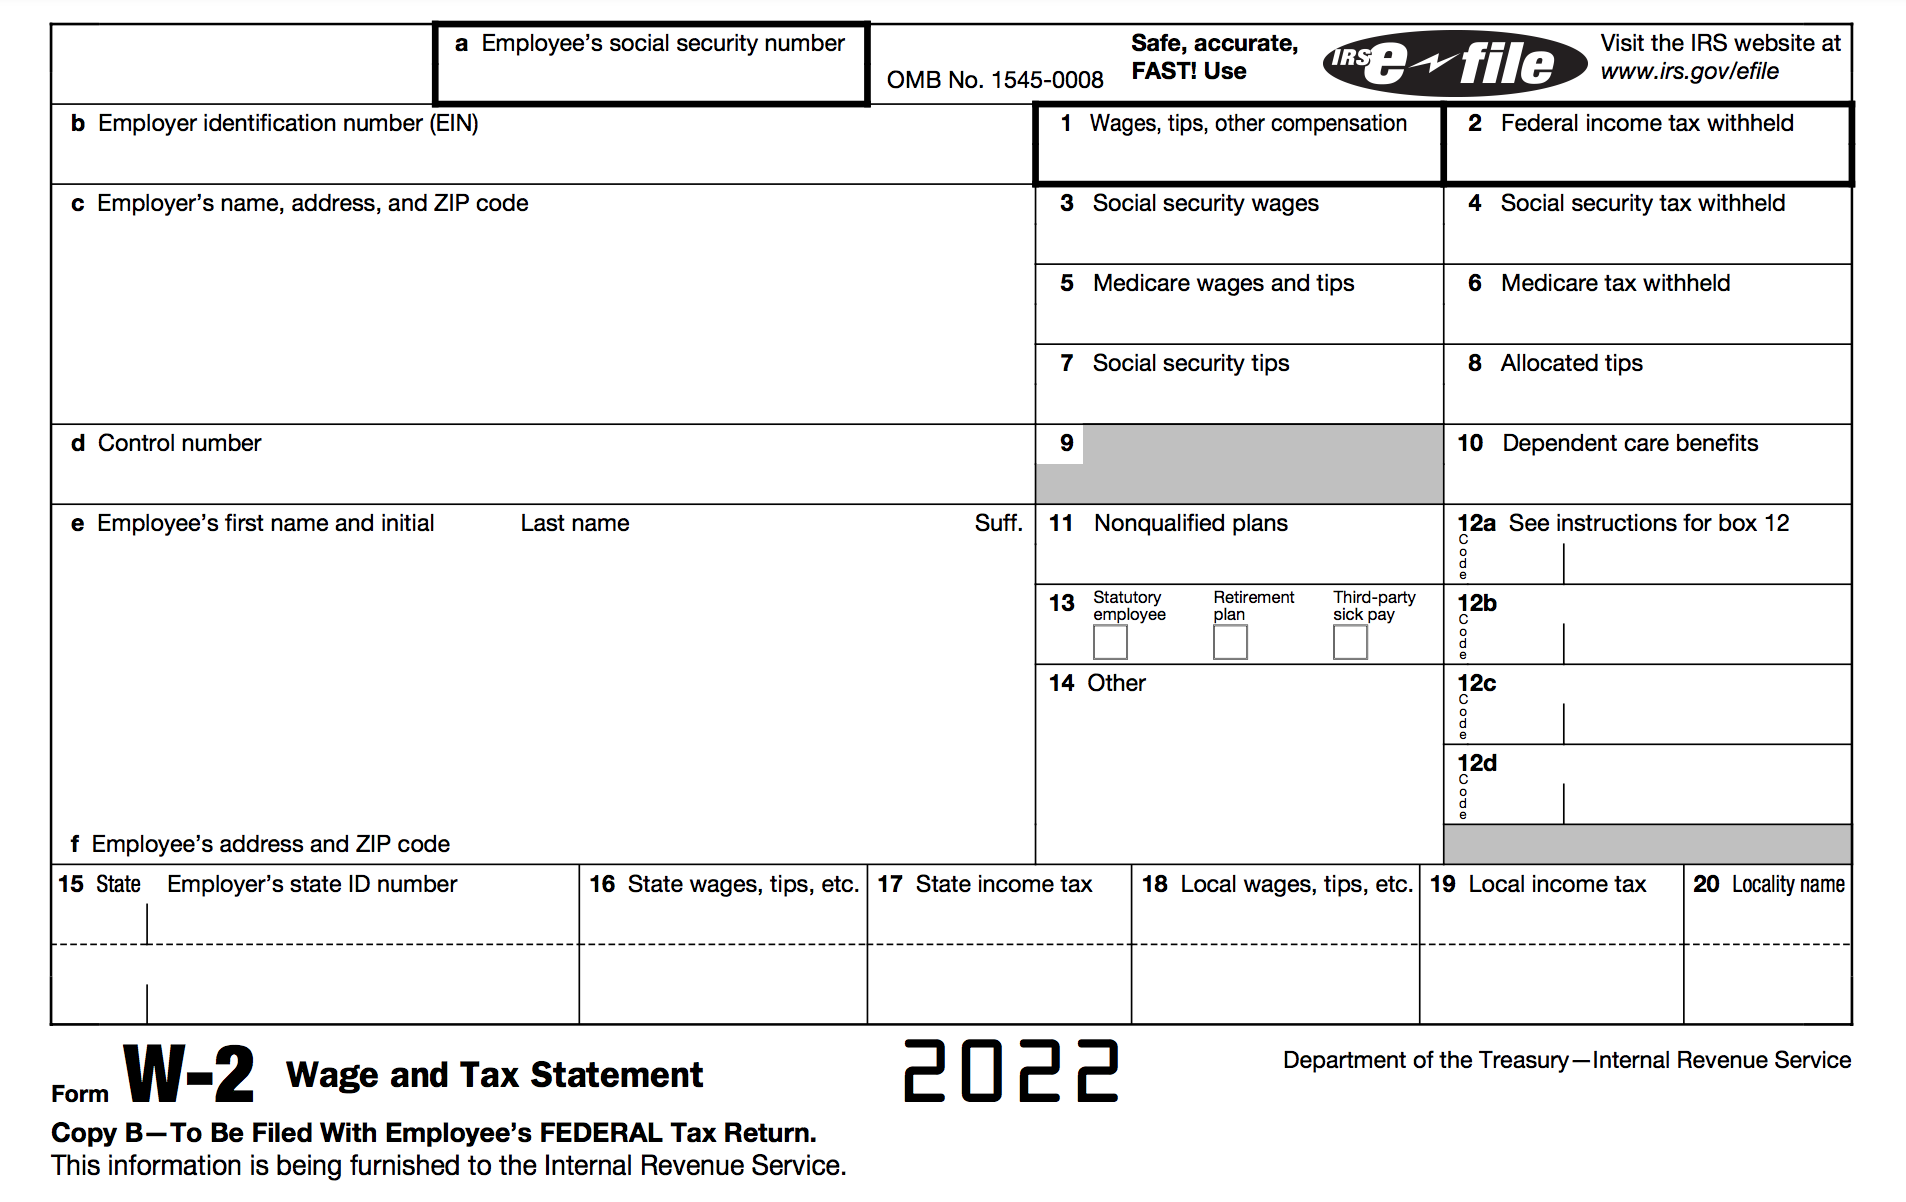 How To Fill Out A W-2 Tax Form | Smartasset pertaining to Irs Gov W2 Forms